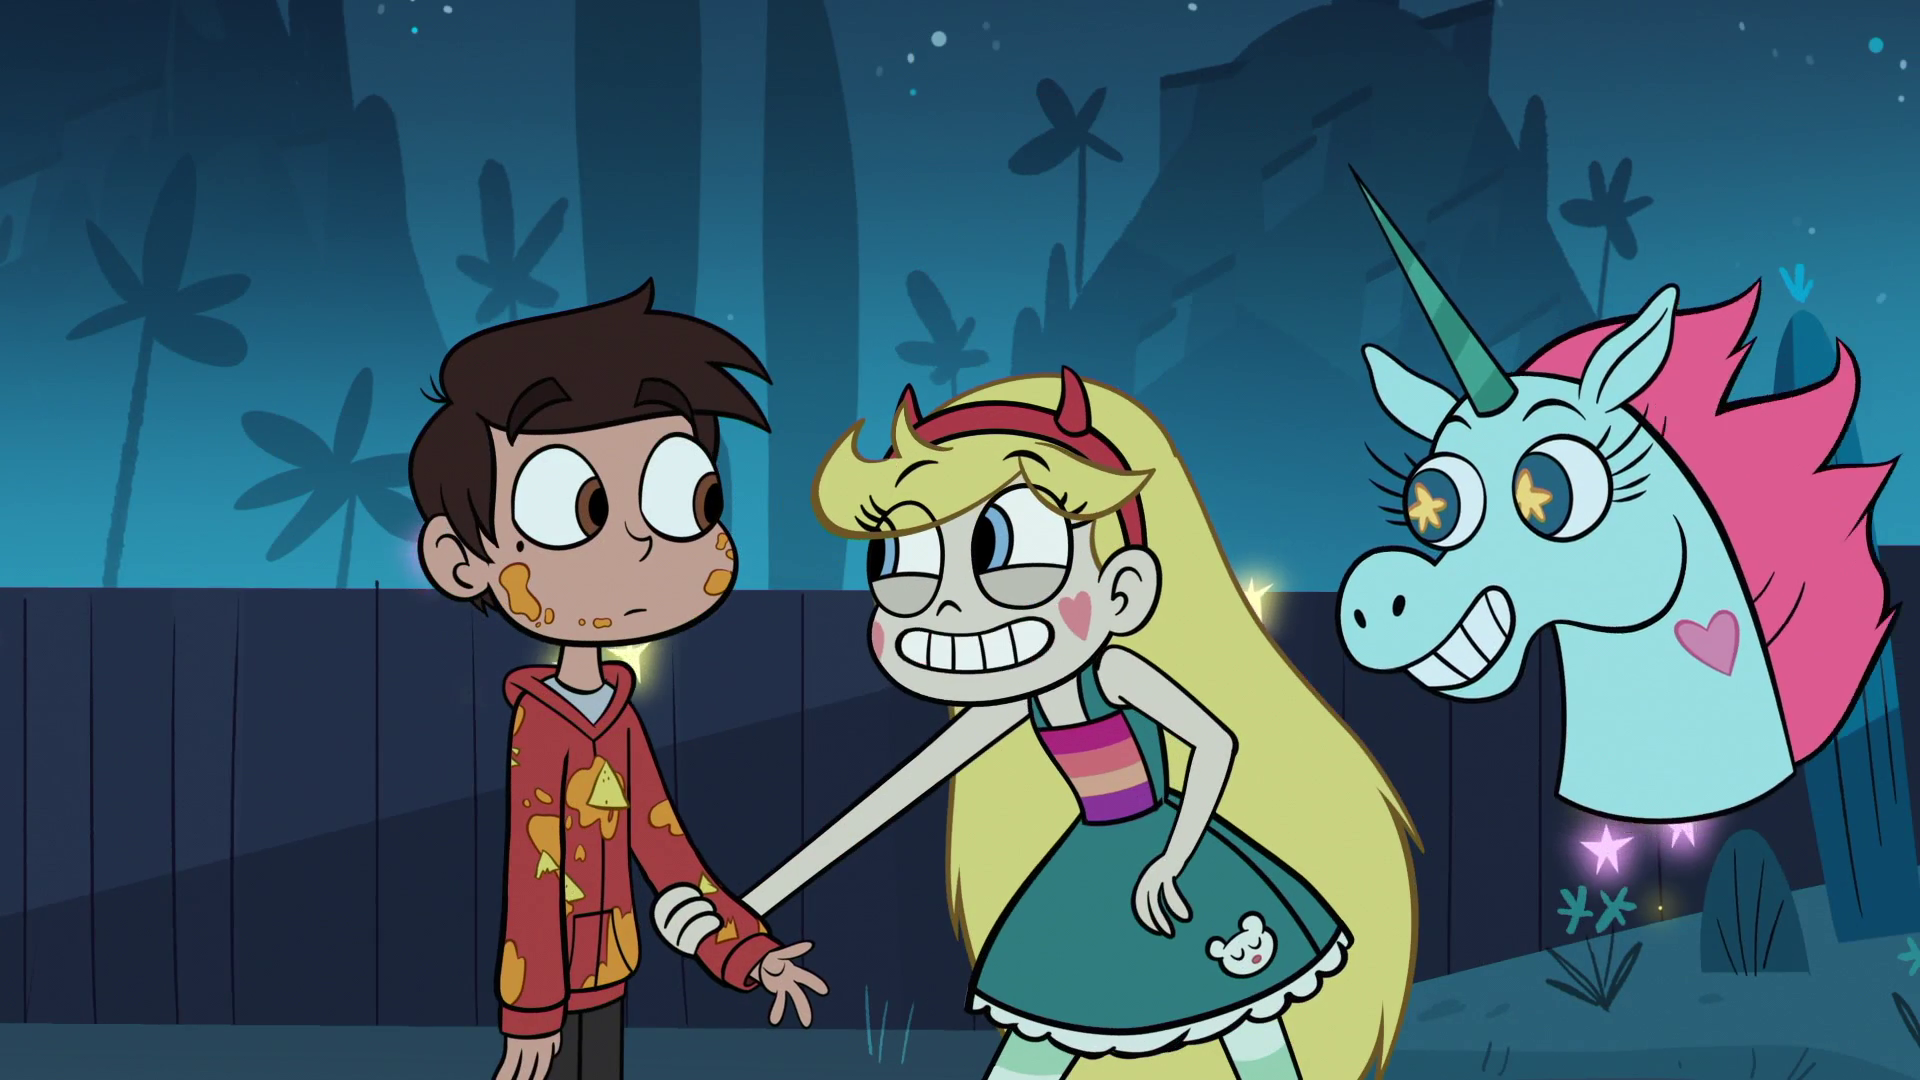 Star vs the forces of evil | Star vs the forces of evil 